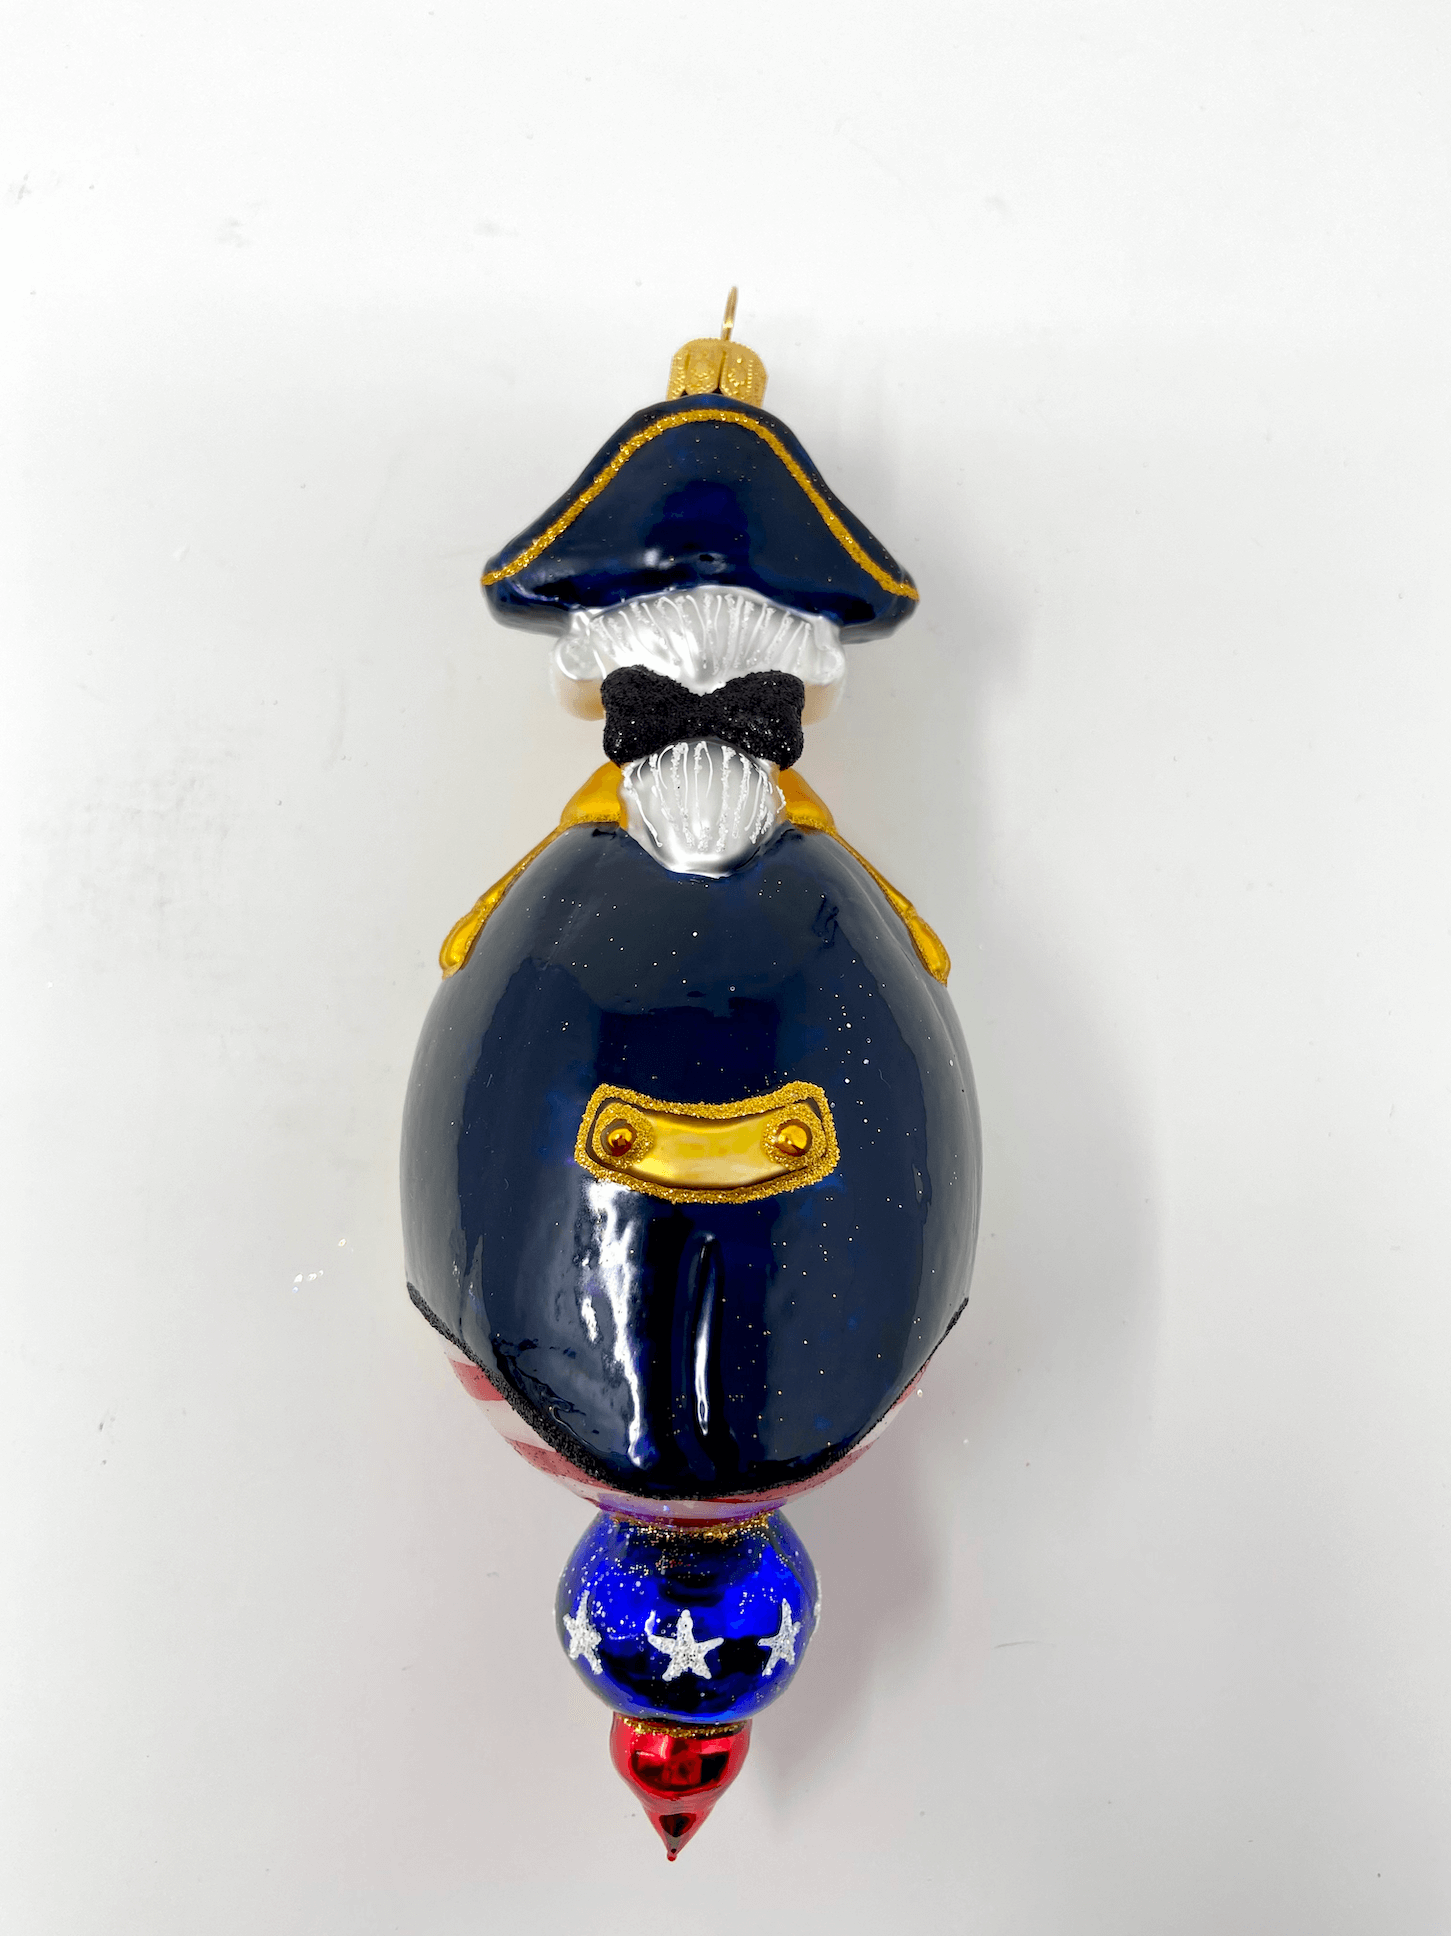 Beautiful George Washington reflector ornament wearing a black cloak and colonial hat with red white and blue patriotic detailing. Polish glass christmas ornaments in saturated colors.